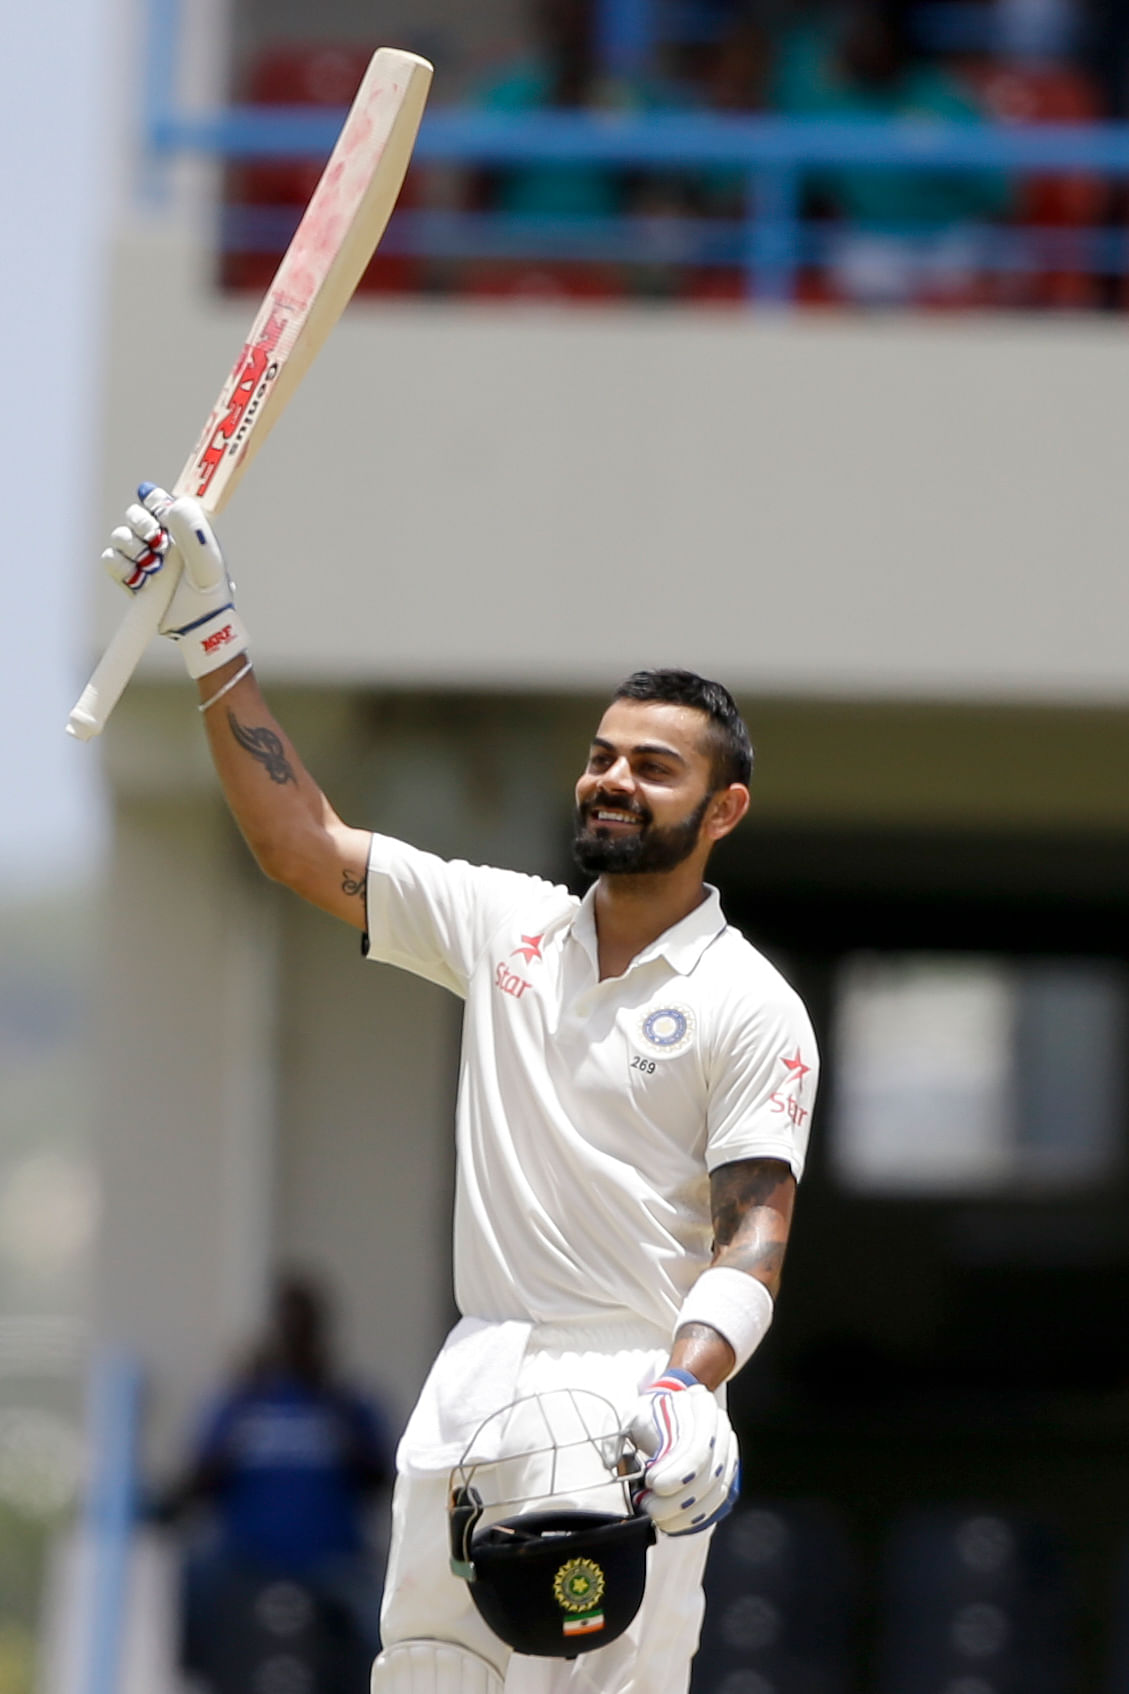 Former West Indian great Sir Vivian Richards applauded Virat Kohli’s maiden double ton in the first test at Antigua.